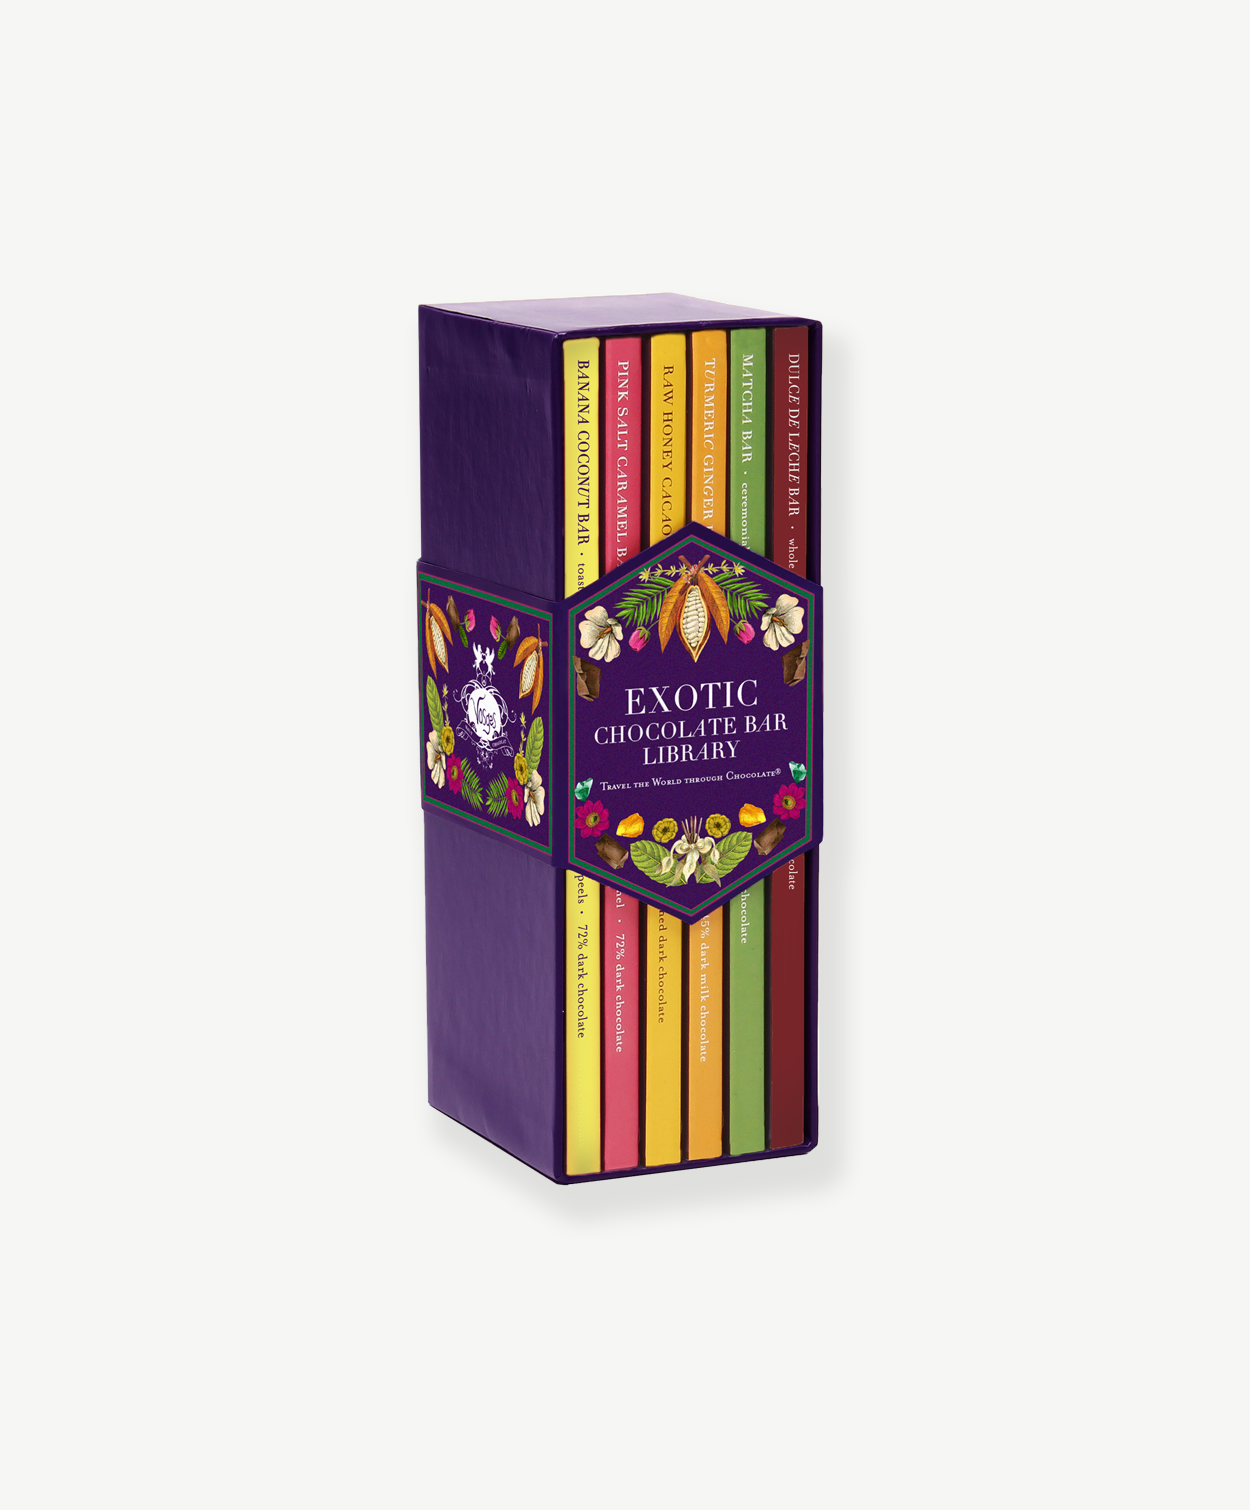 A tall purple box containing six colorful chocolate bars, bound by a purple sleeve reading, "Exotic Chocolate Bar Library" stands upright on a grey background.